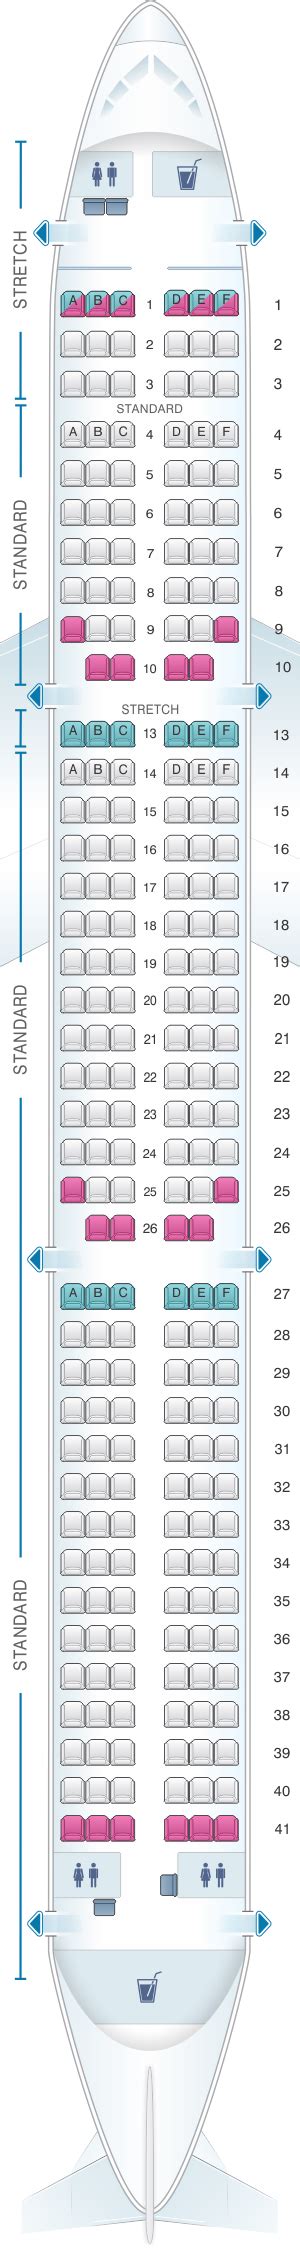 Frontier airlines plane seating chart. American Airlines Boeing 777-200 (Zodiac with premium economy) American Airlines Boeing 777-200 (BEA with premium economy) American Airlines Boeing 737 MAX 8 : WestJet Boeing 737 MAX 8 : SilkAir Boeing 737-800 : SilkAir Boeing 737 MAX 8 : Pegasus Airlines Airbus A320 (neo) Pegasus Airlines Boeing 737-800 : Pegasus Airlines … 